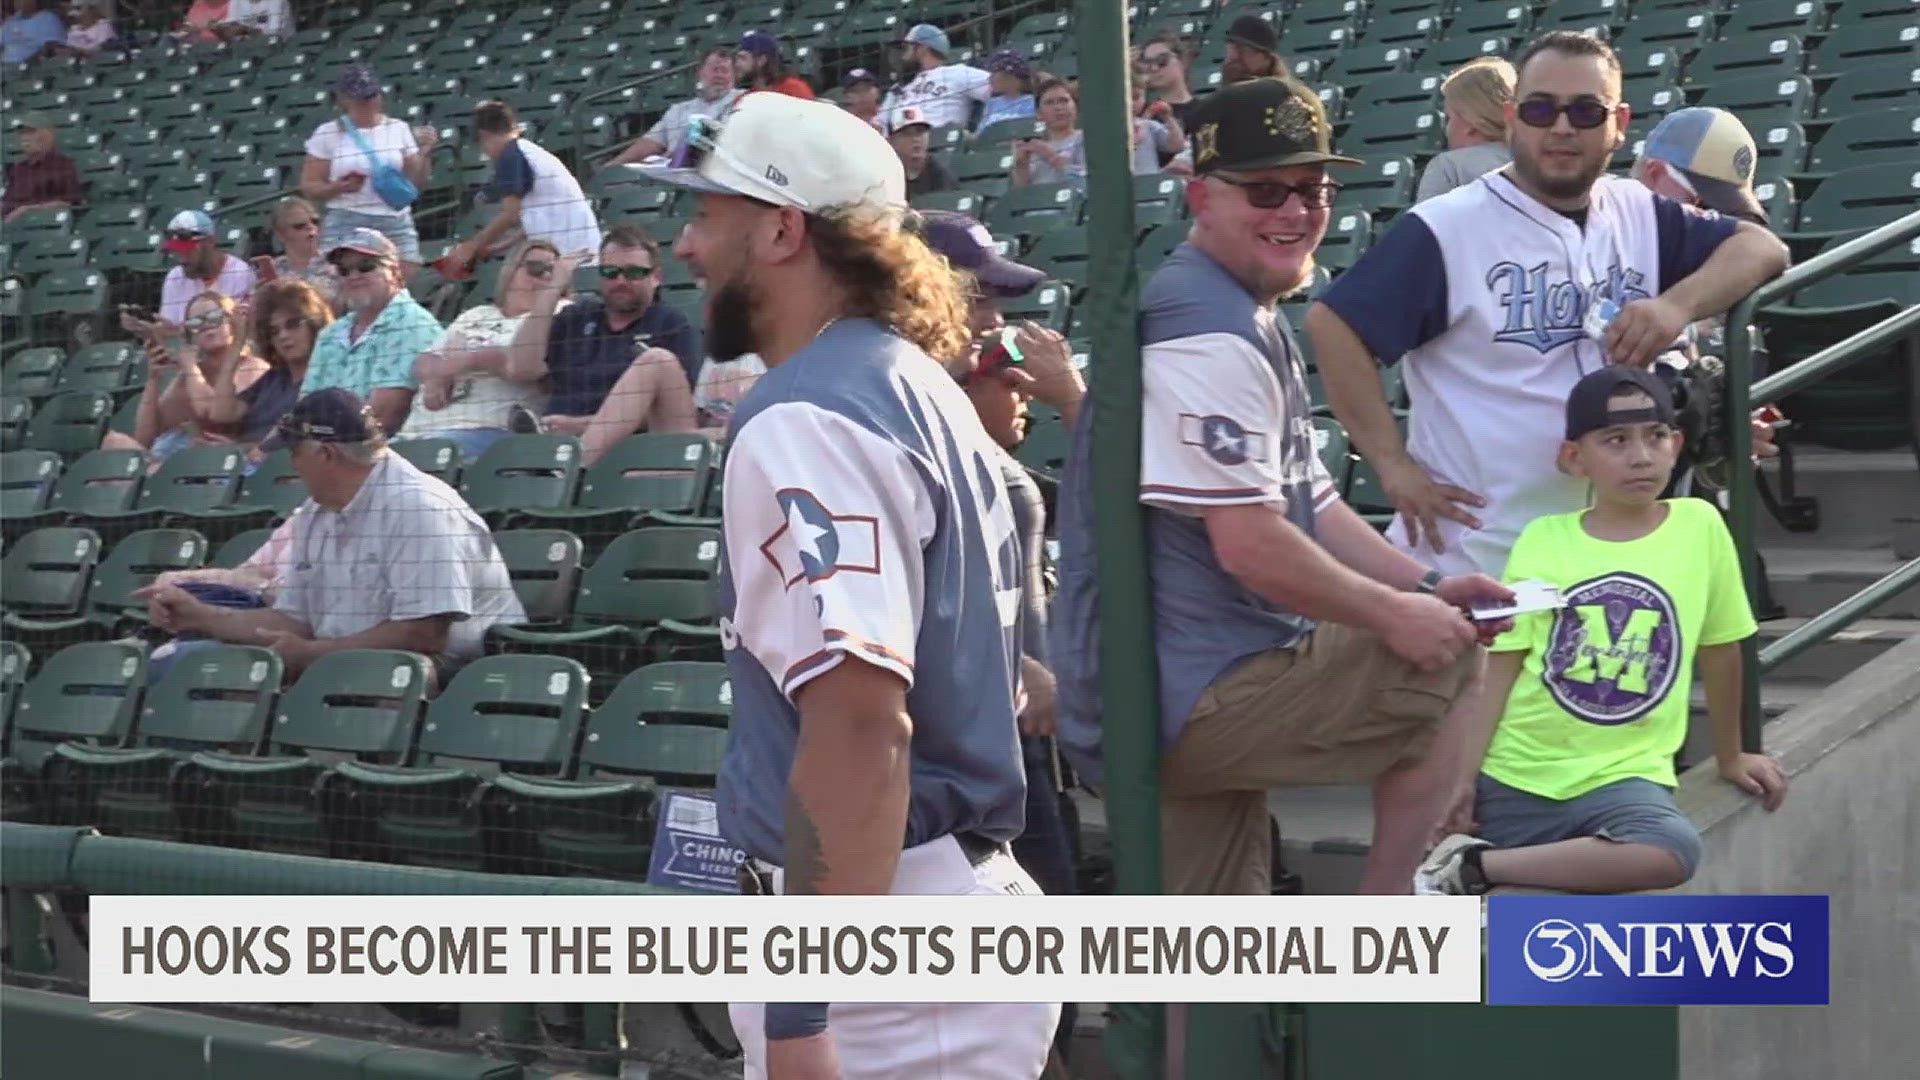 The Blue Ghosts lost, 17-4, to the Arkansas Travelers on Friday night at Whataburger Field.